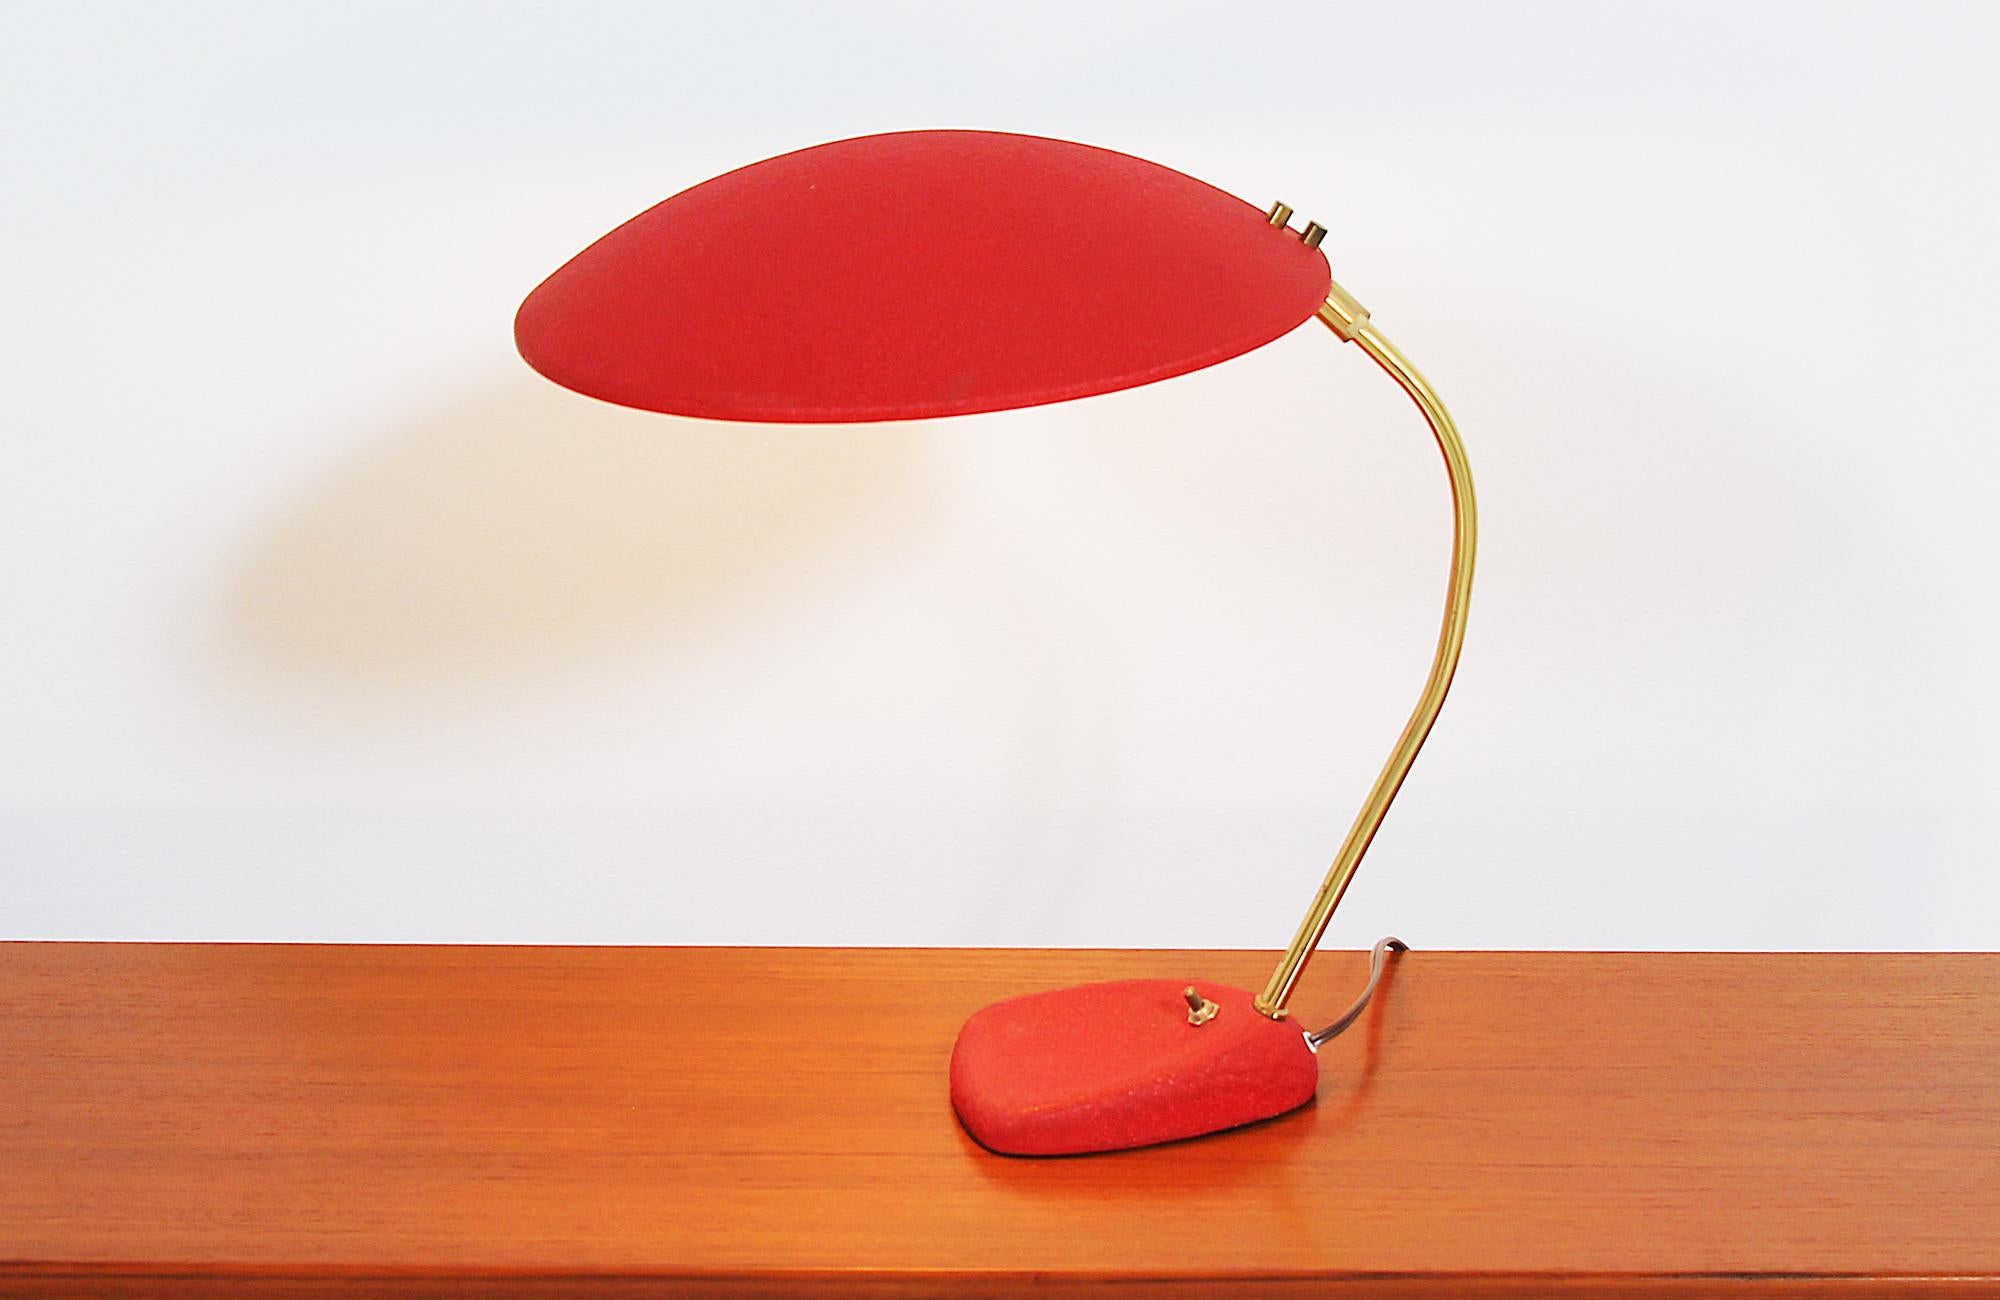 Beautiful enameled desk lamp designed and manufactured in the United States, circa 1960s. This practical desk lamp features a red enamel base and hooded shade that is sturdily supported by a polished brass neck. The shade can be rotated 360 degrees